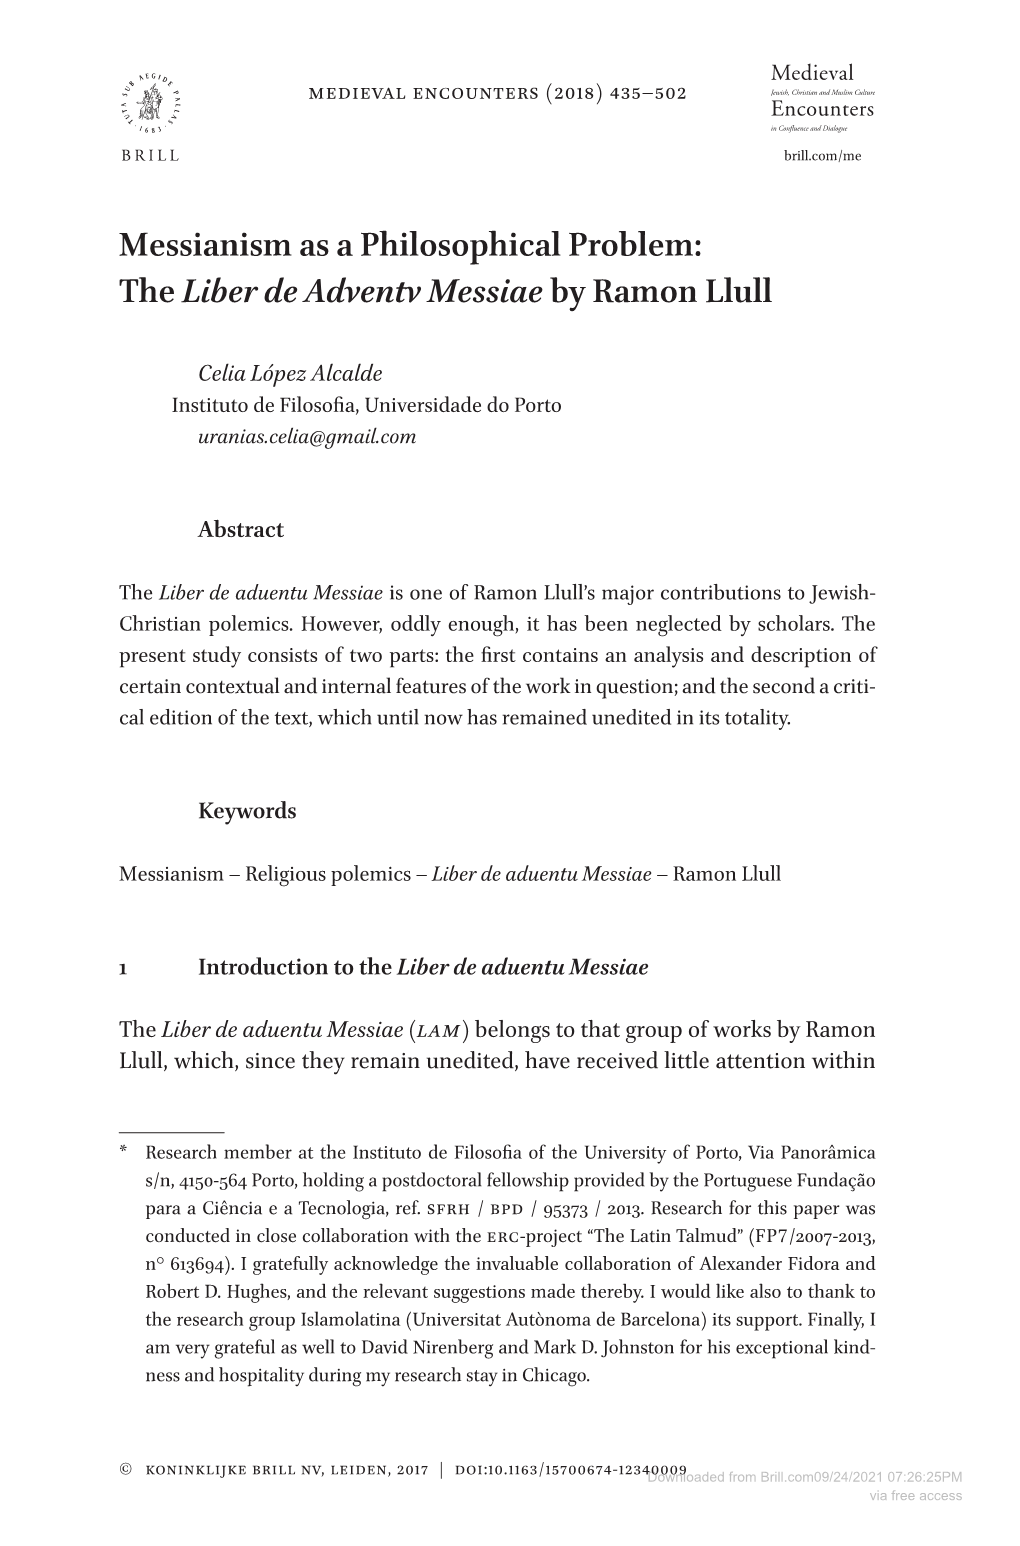 Messianism As a Philosophical Problem: the Liber De Adventv Messiae by Ramon Llull